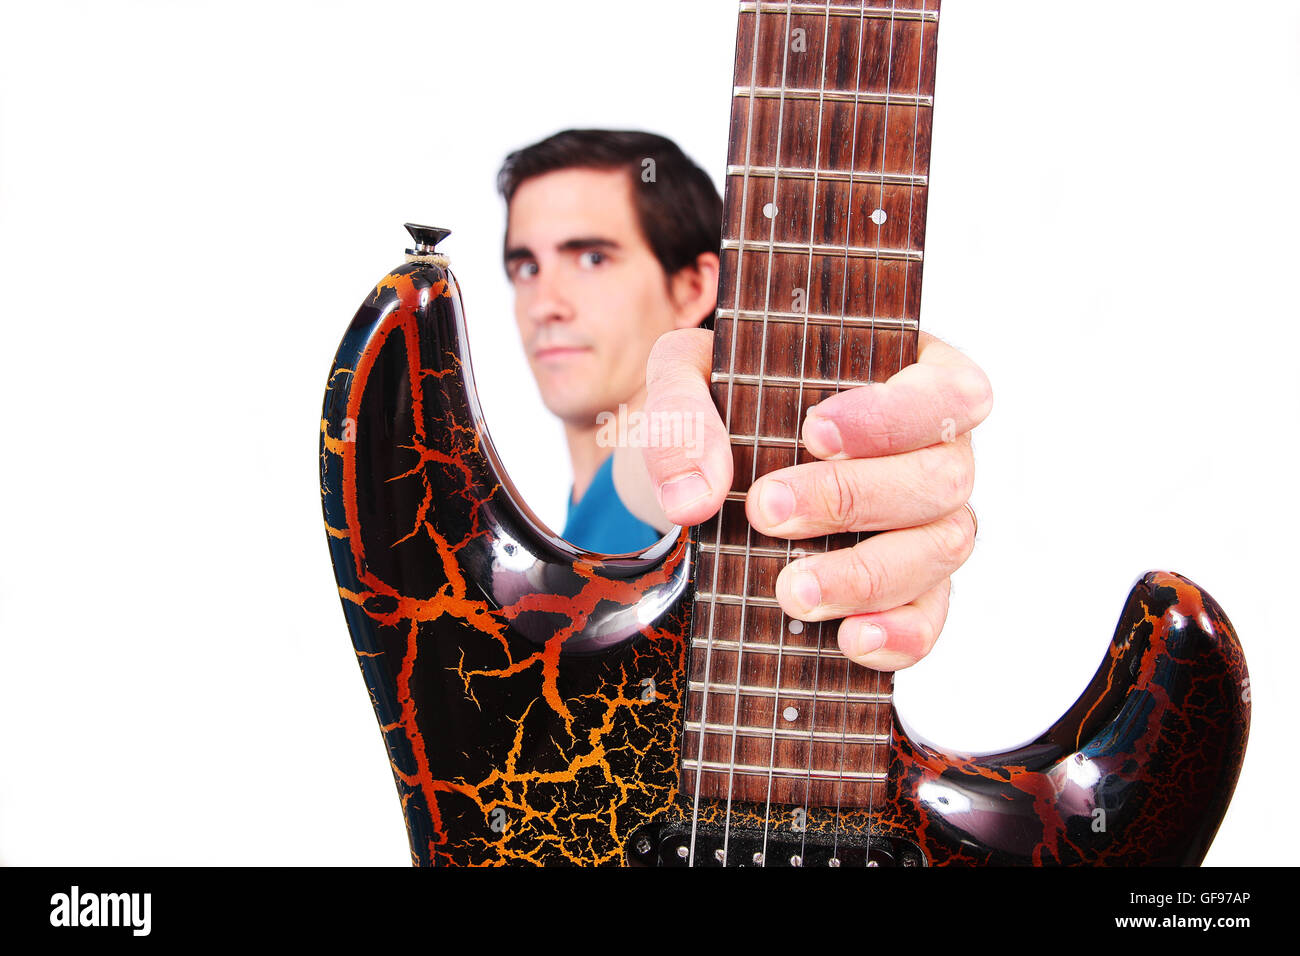 A male guitarrist in action holding his electric guitar in white background Stock Photo